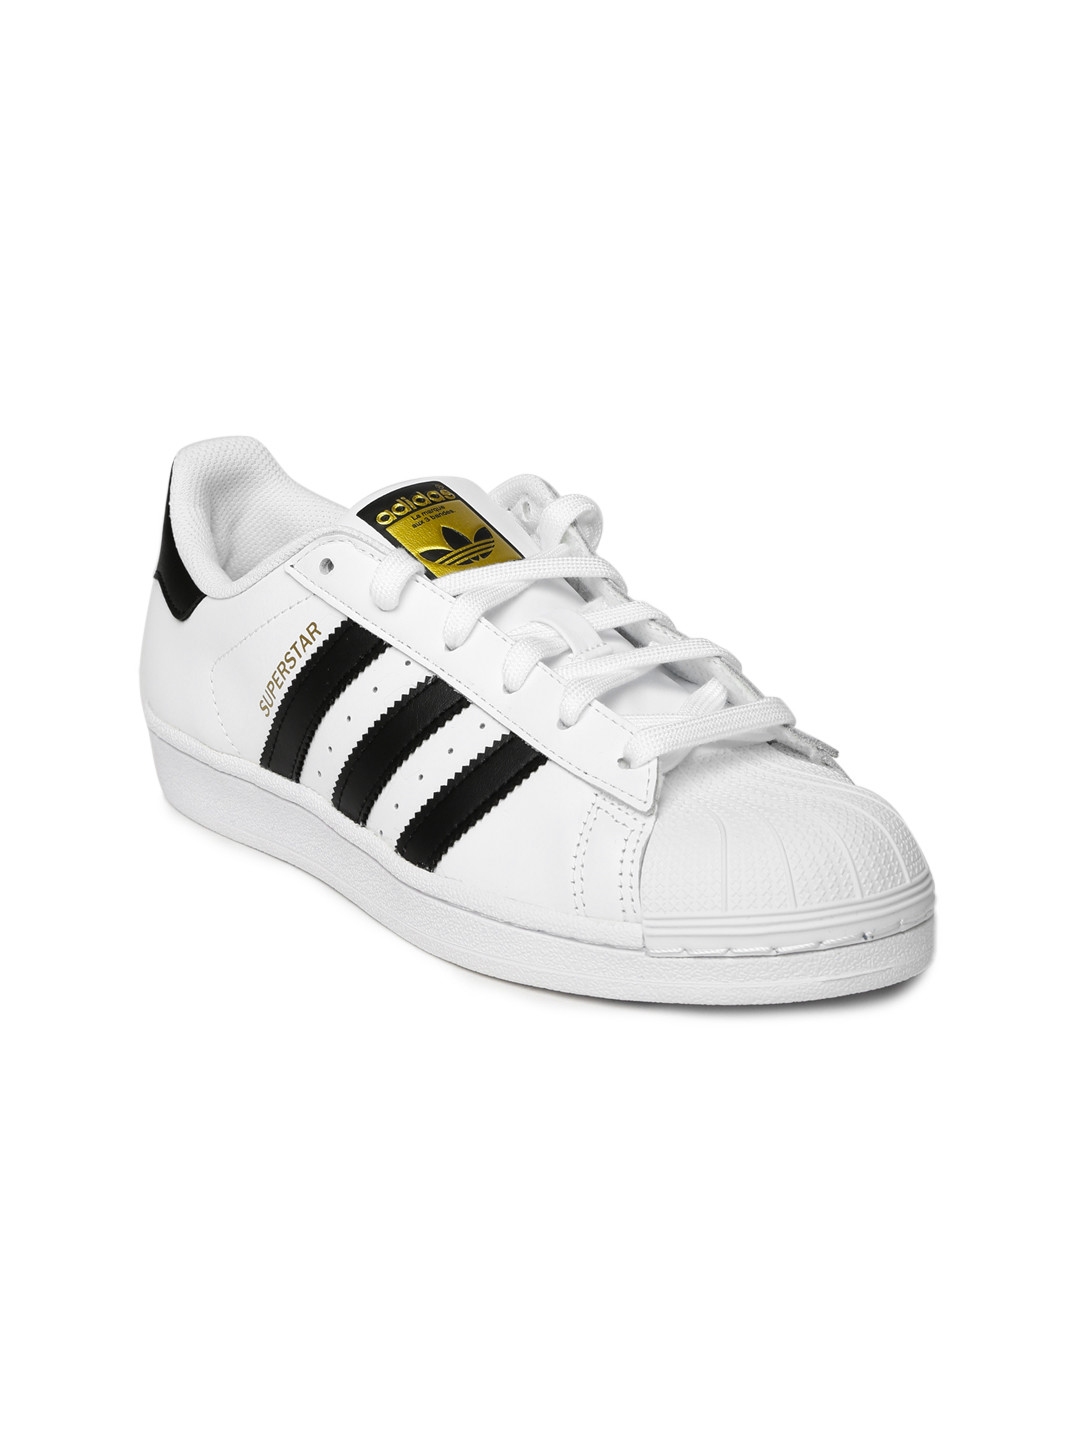 Buy ADIDAS Originals Women White Superstar Sneakers - Casual Shoes for ...